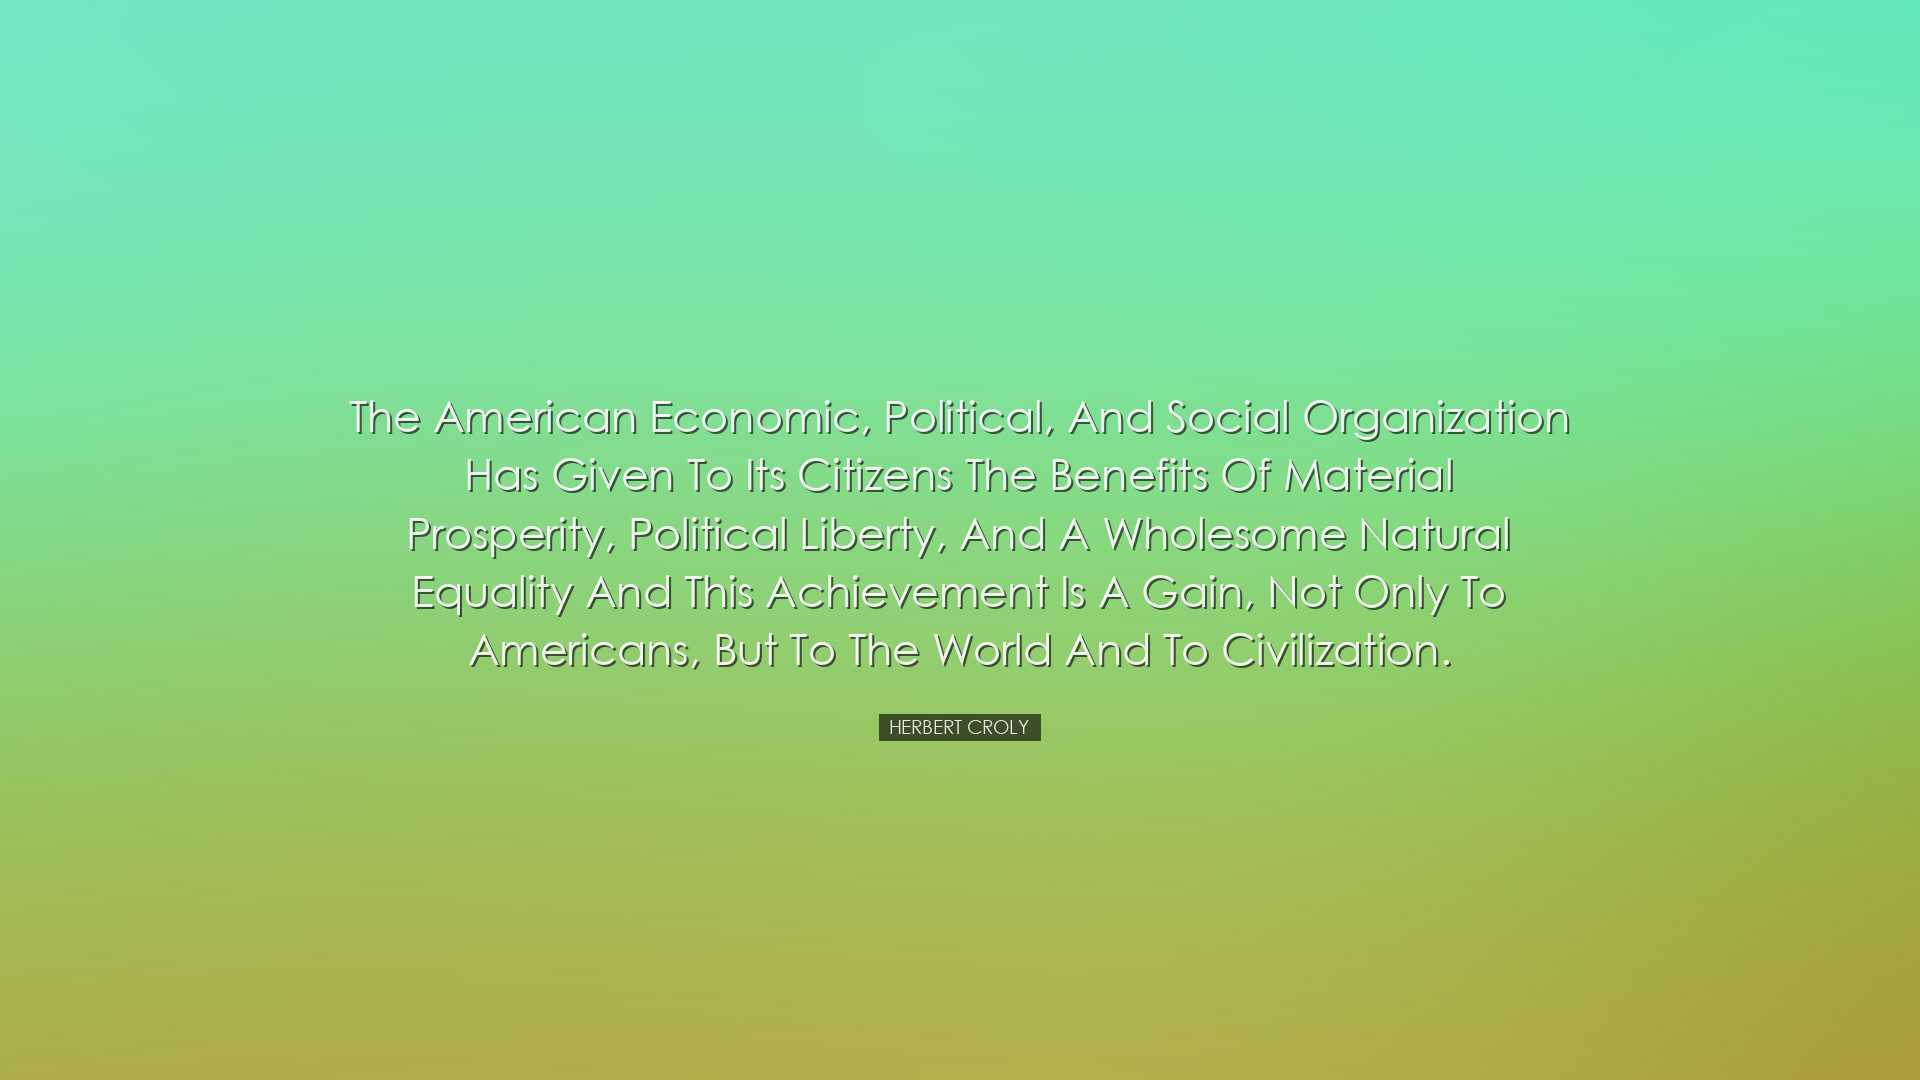 The American economic, political, and social organization has give